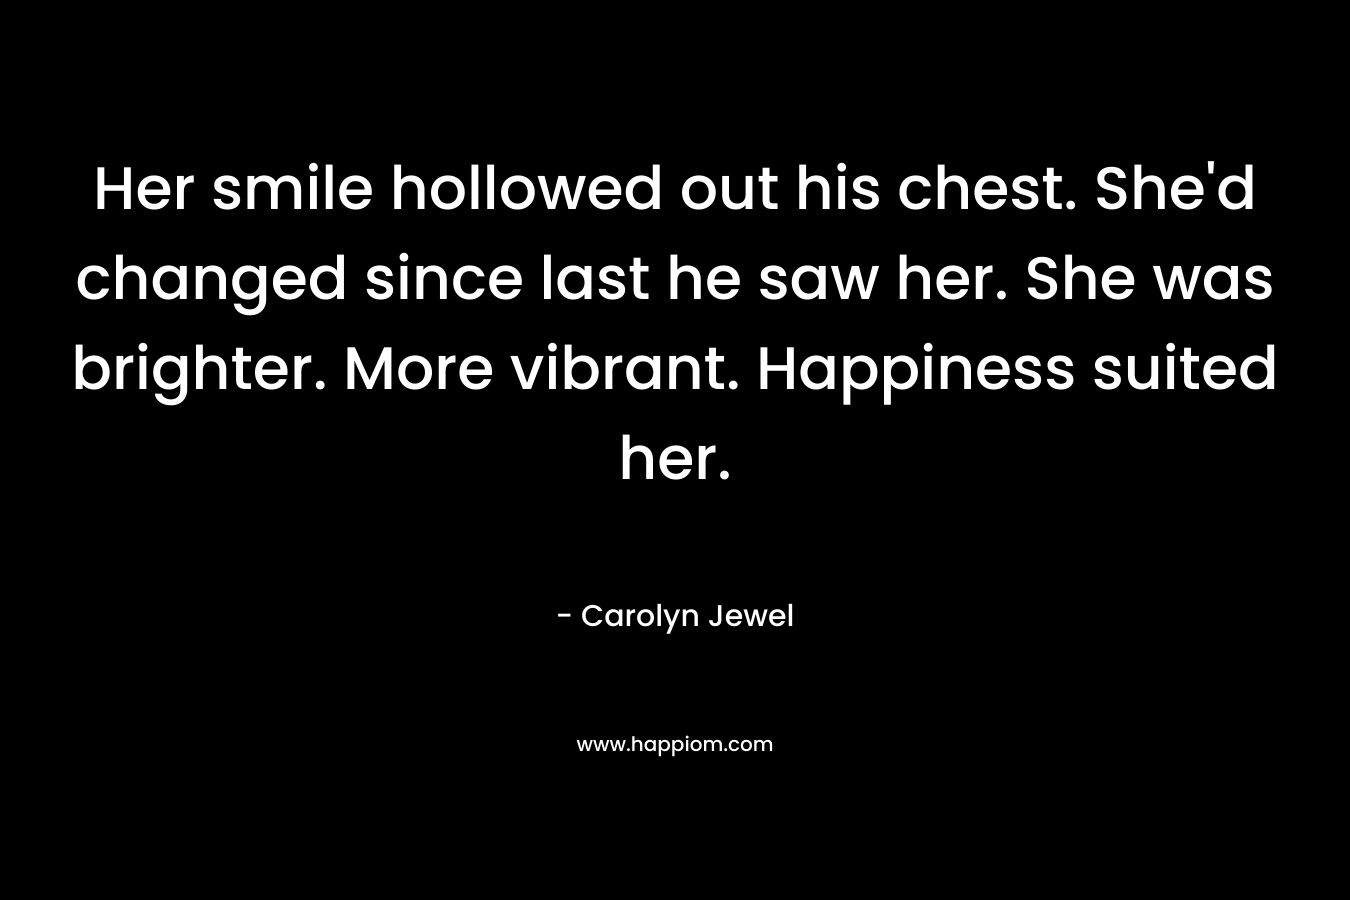 Her smile hollowed out his chest. She'd changed since last he saw her. She was brighter. More vibrant. Happiness suited her.